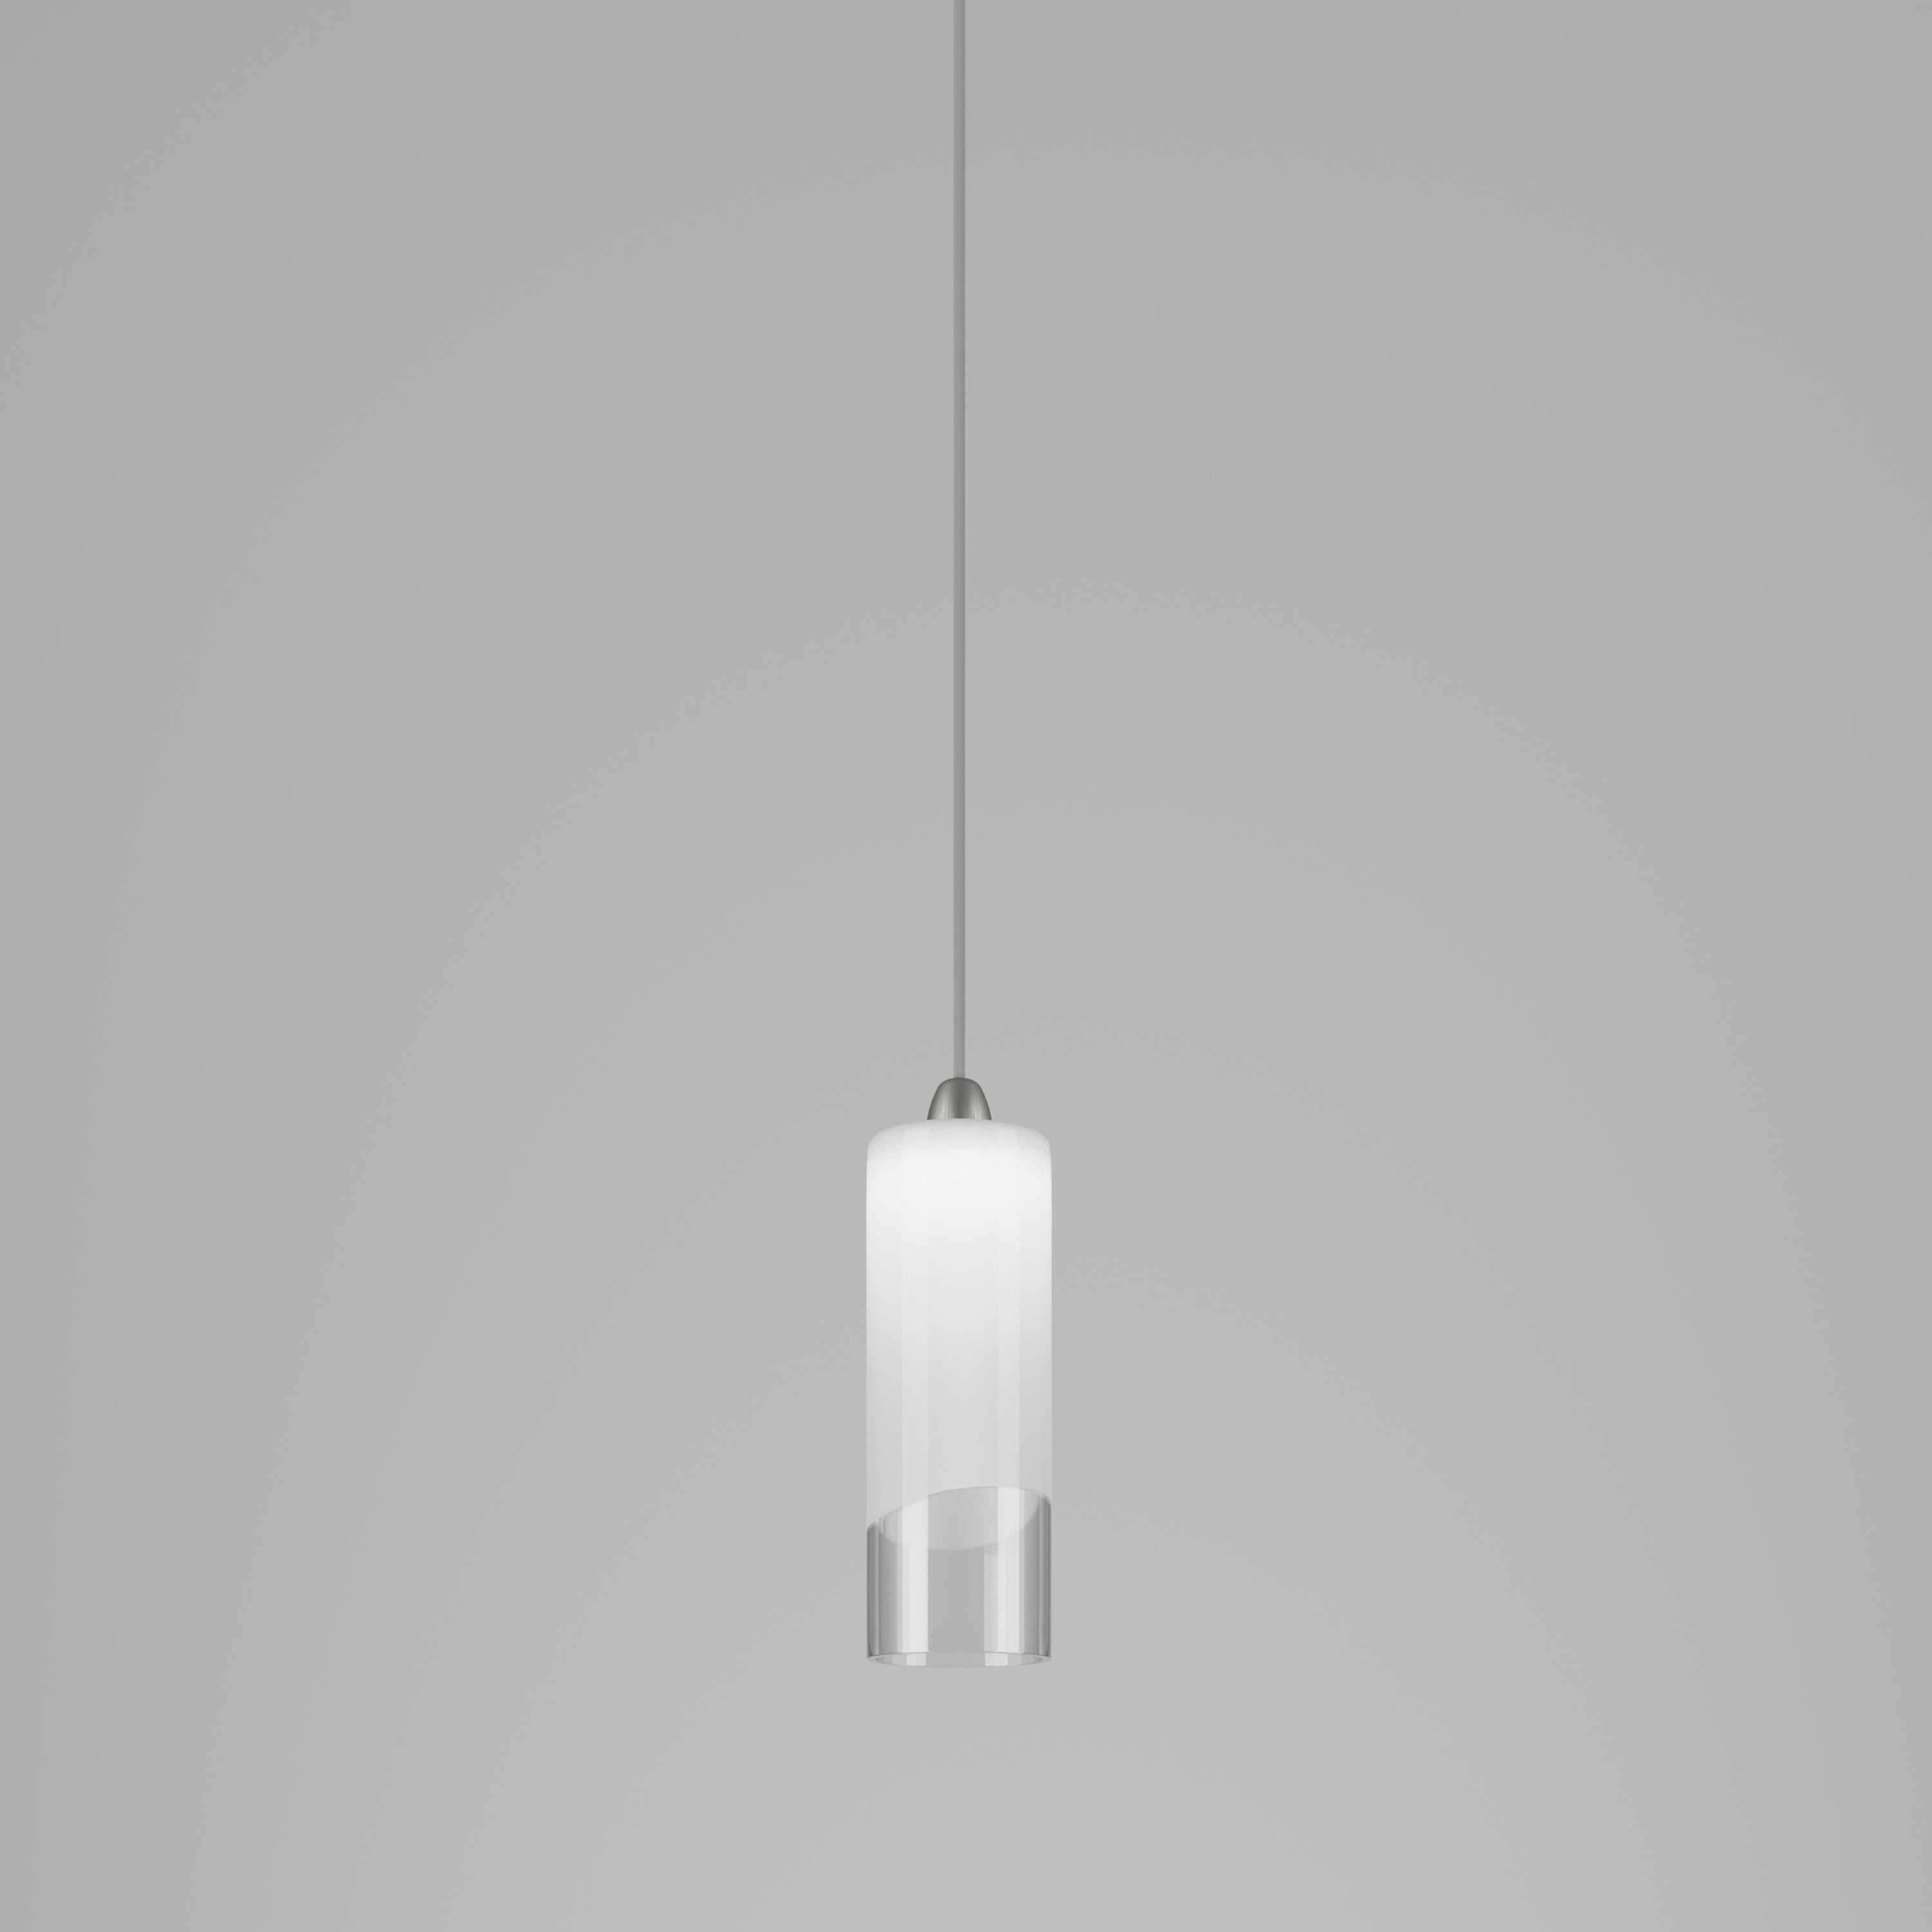 The minimal and unobtrusive design of this collection enhances the light source thanks to the translucid glass band trapped between the crystal layers.

Specifications:
Material: Glass
Light source: G9 UL
No of bulbs: 1x60W G9 UL